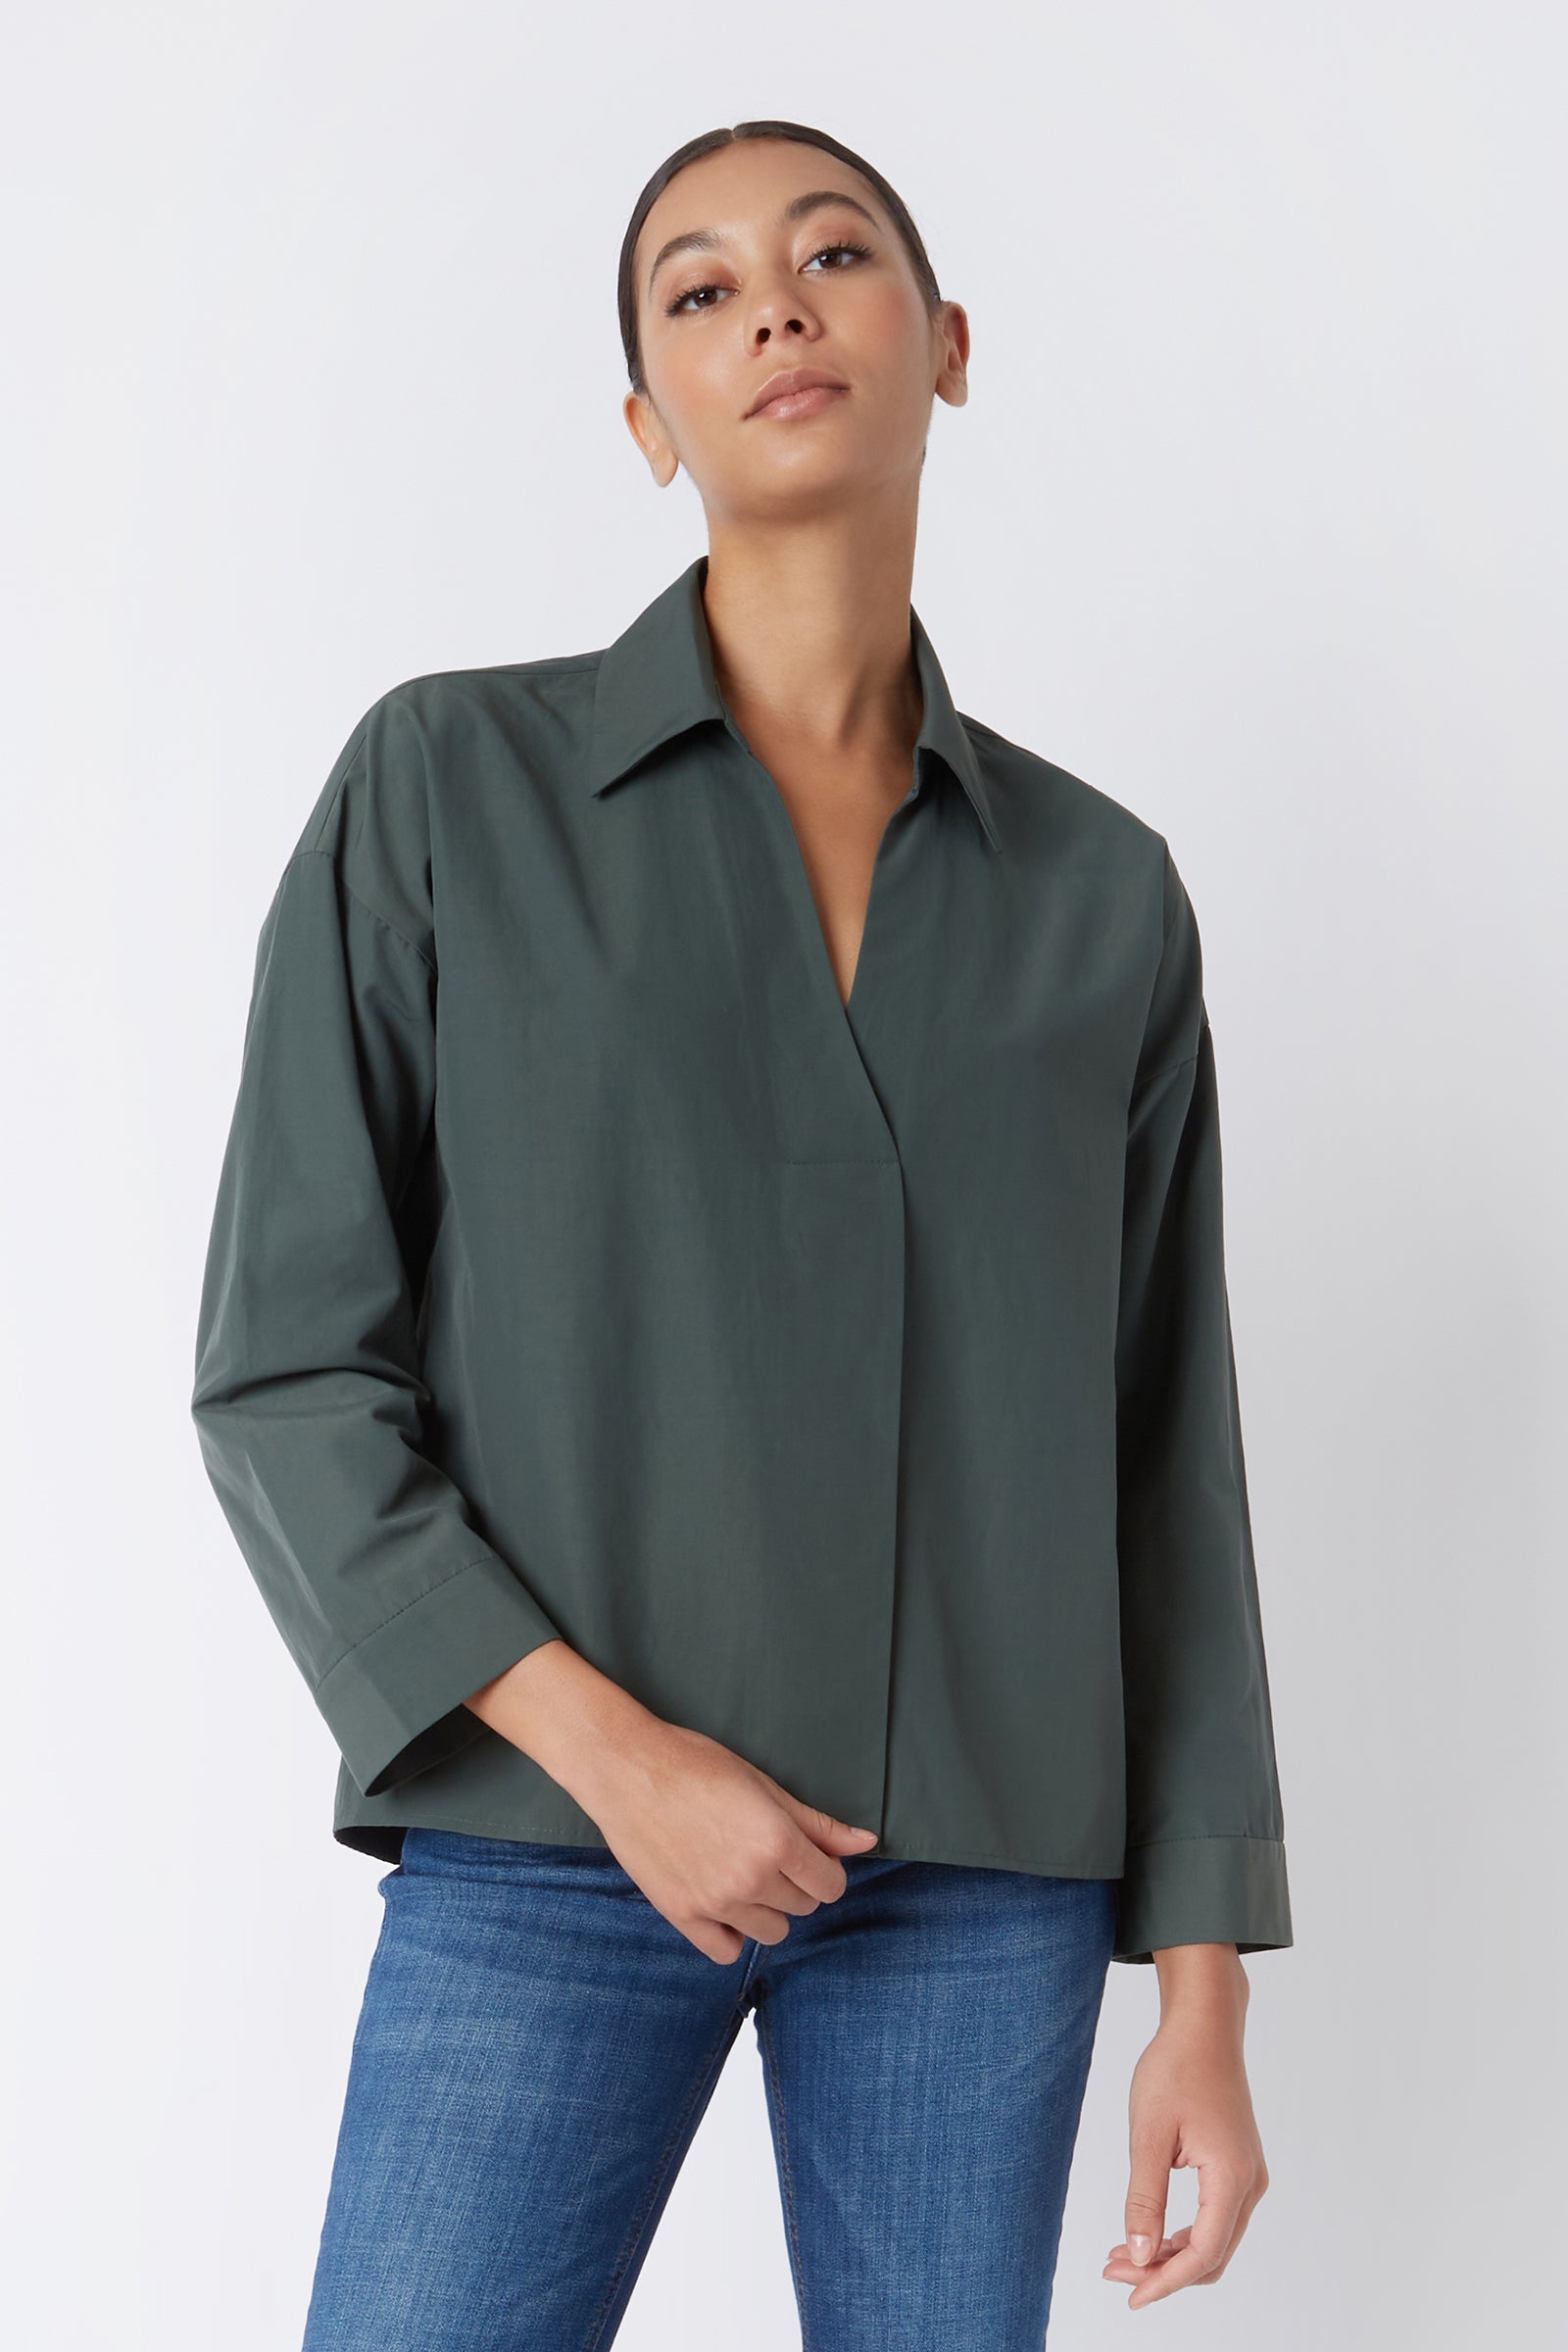 Kal Rieman Emma Collared Kimono in Loden Green on Model with Chin Up Cropped Front View